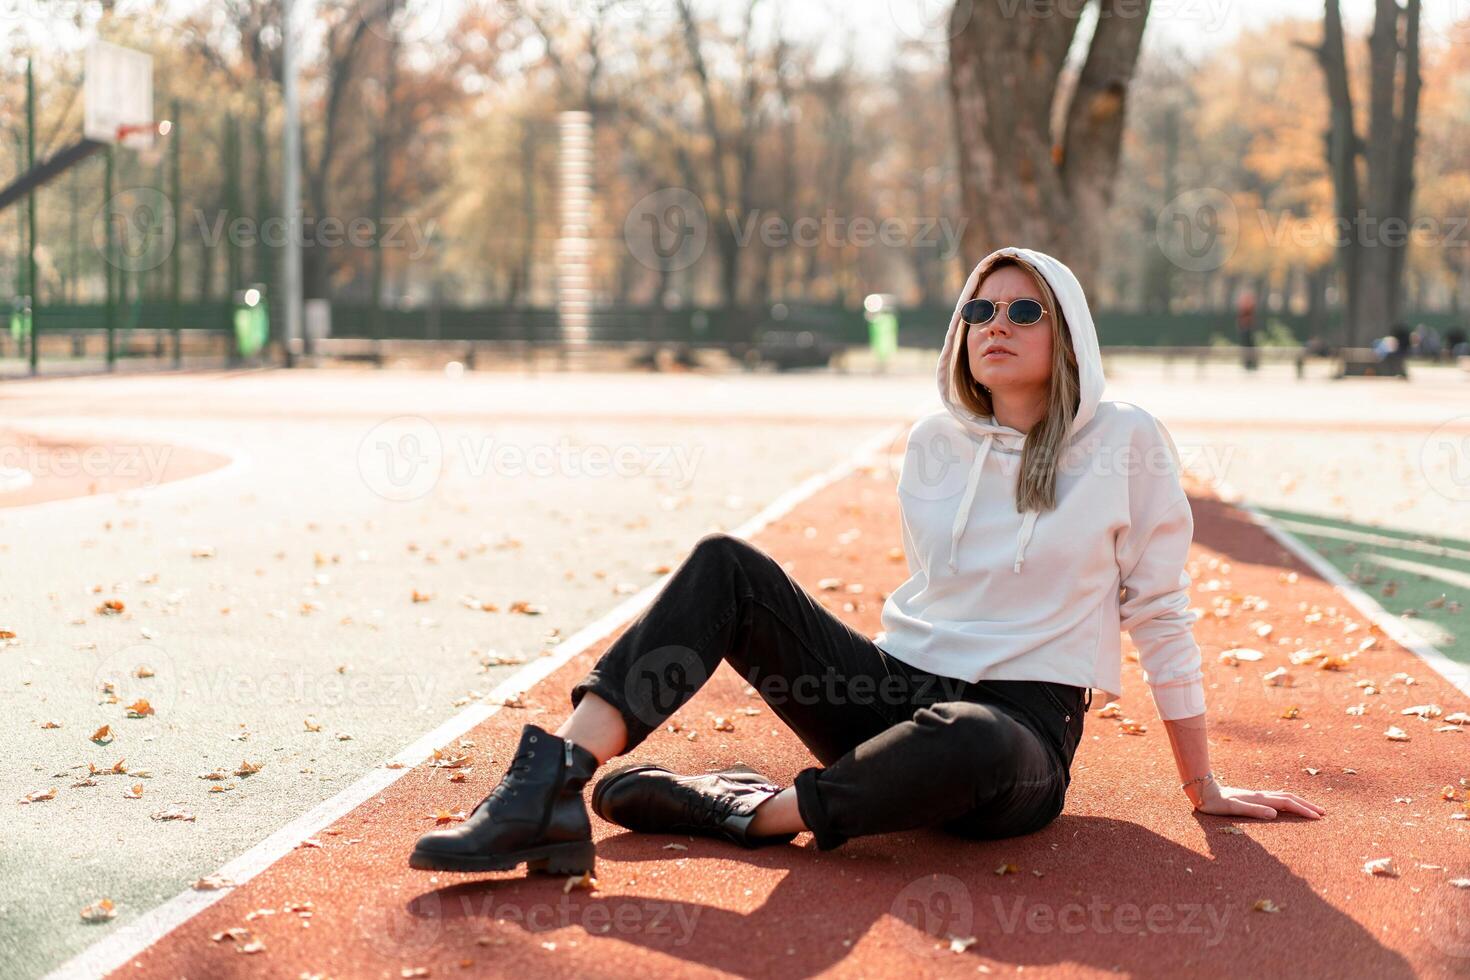 Outdoor portrait of young beautiful woman with long in sunglasses and a white hooded sweater sitting on the sportsground track photo